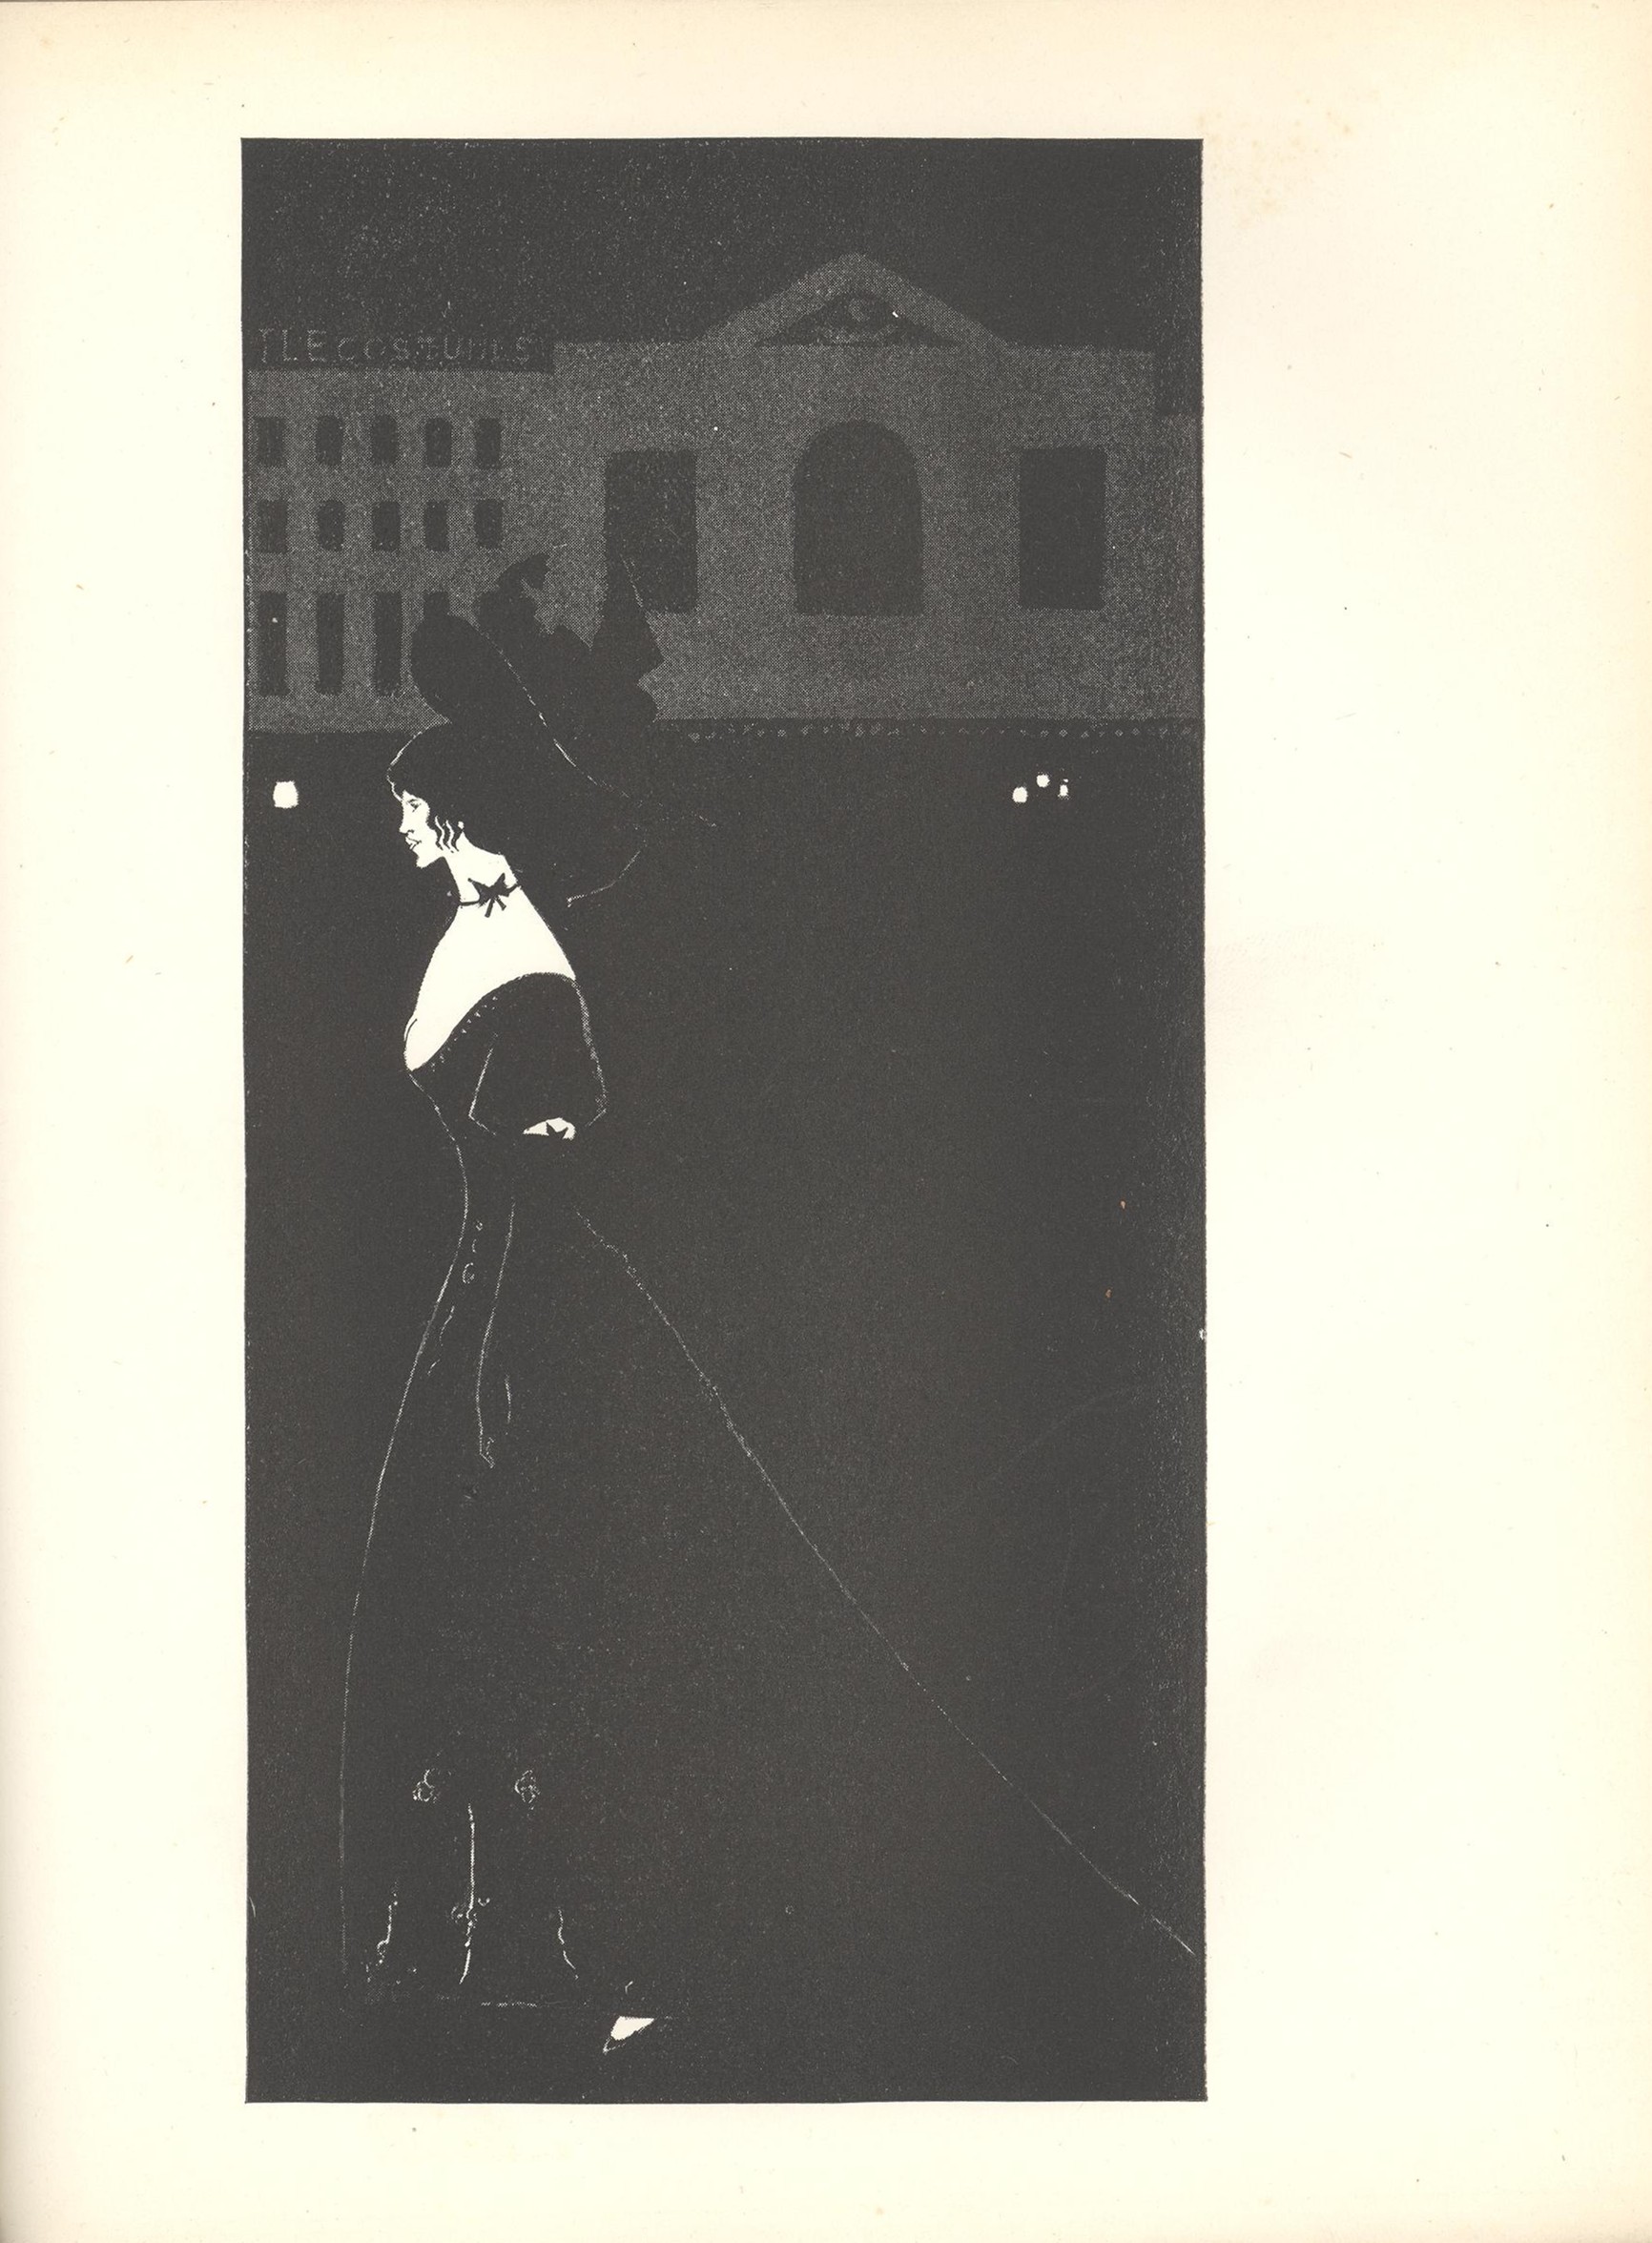 Image is of a night scene In extreme foreground a solitary full length woman is shown in profile wearing a black evening gown with a bow around her throat and her hair in a coif walking toward the left corner In the background of the upper section there is the suggestion of an architectural façade and lights This façade has three large windows in a row on the right side and fifteen smaller windows in rows of five on the left side There is an attached sign that reads Costumes The image is displayed vertically